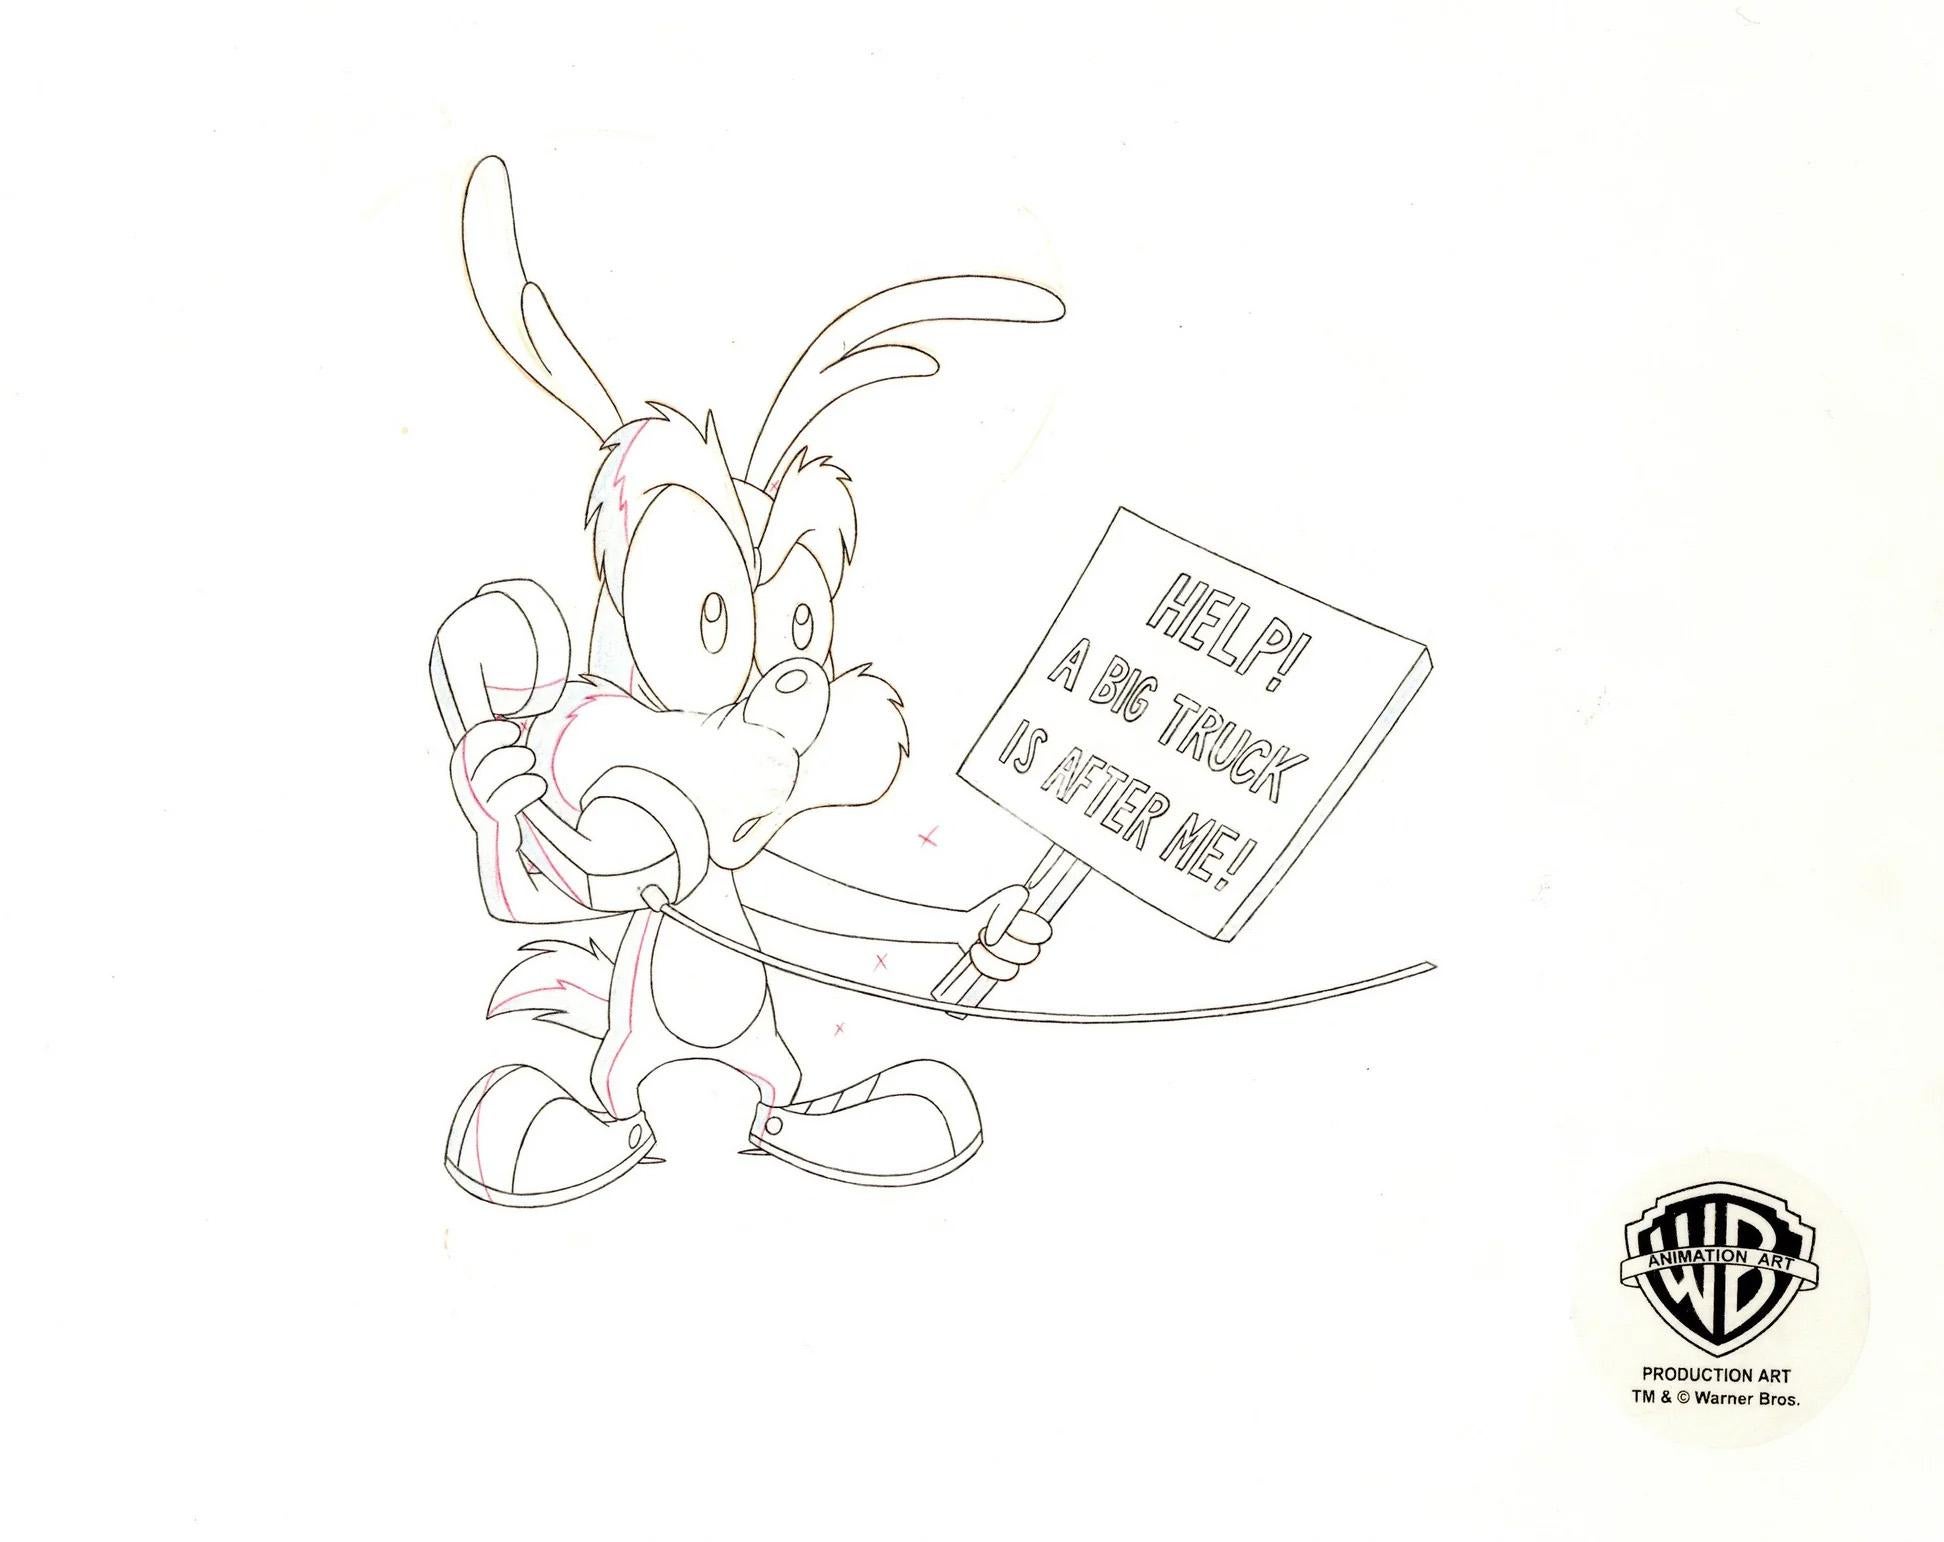 Tiny Toons Original Production Drawing: Calamity Coyote - Art by Warner Bros. Studio Artists